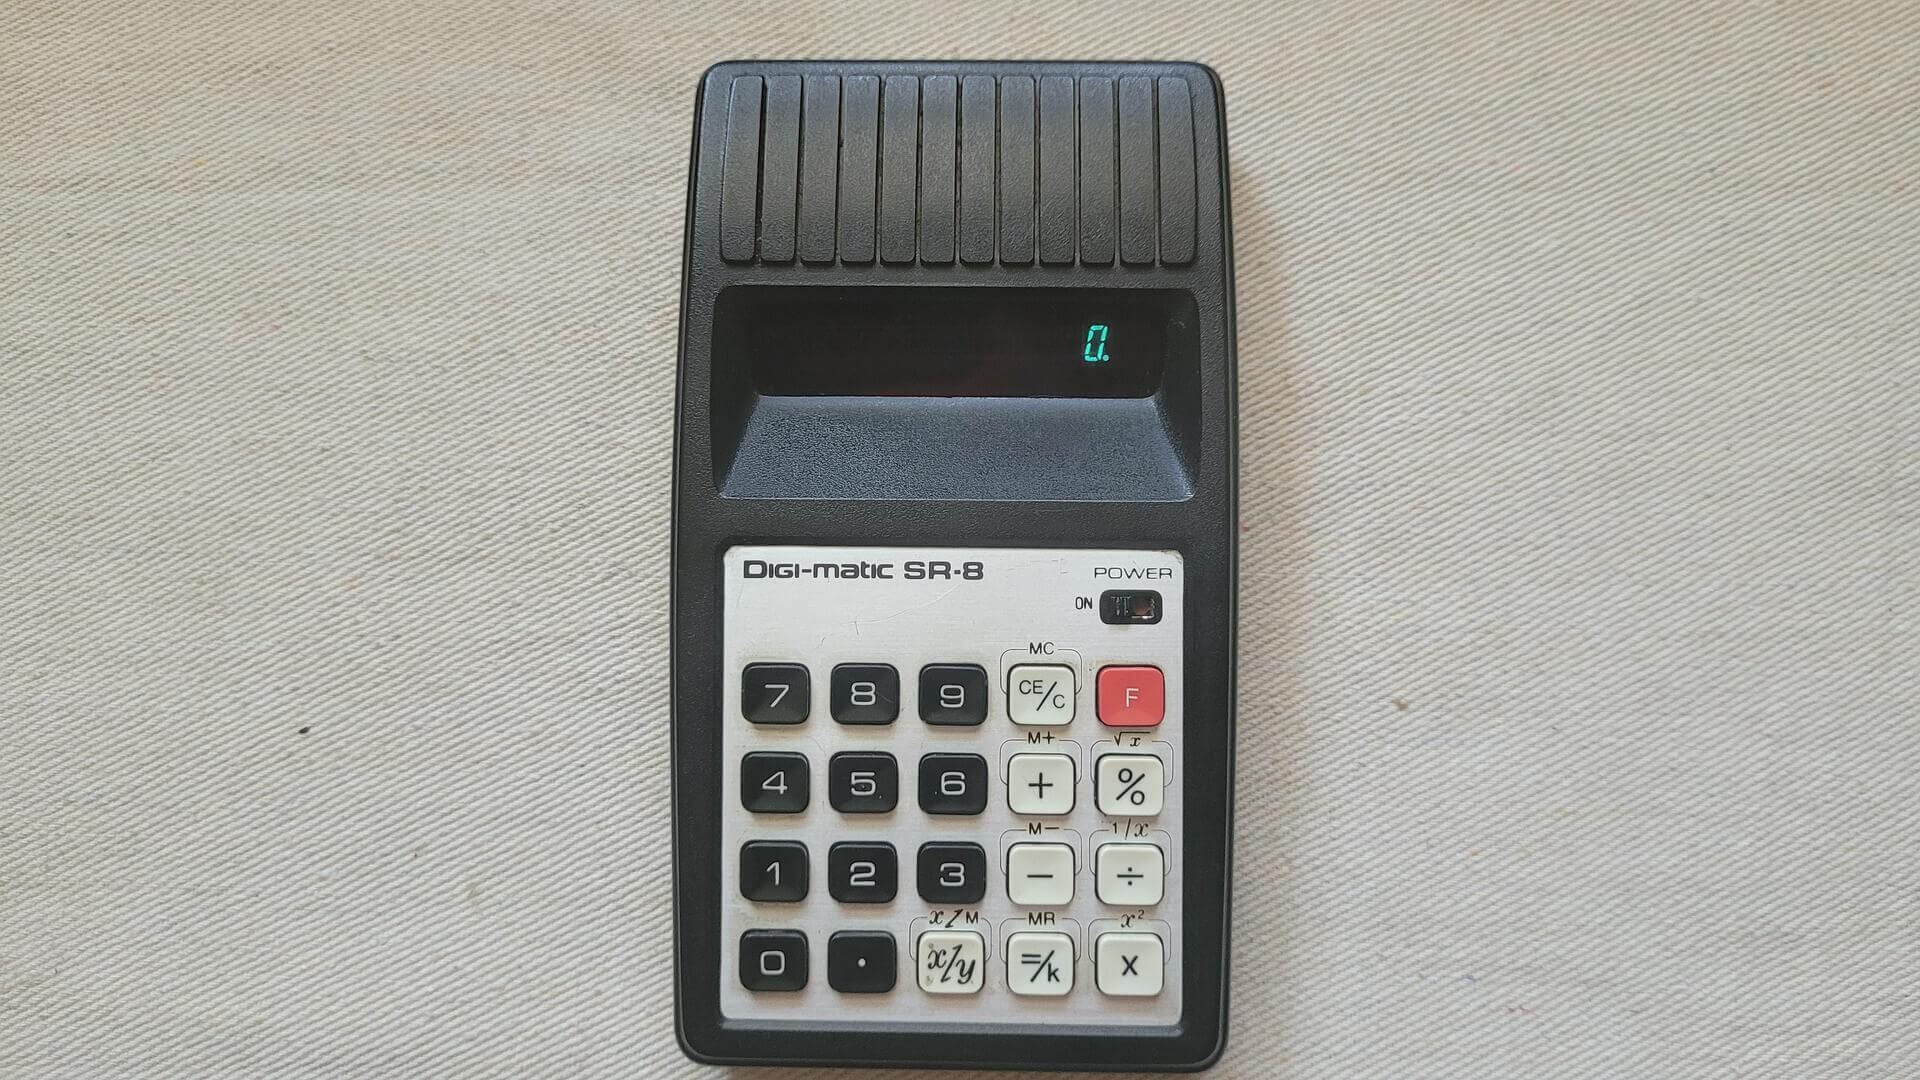 1970s Sears Digi-matic SR-8 Arithmetic Calculator with 8 Digits 9 functions, 20 keys, and a VFD (vacuum fluorescent) display - Made in Japan vintage collectible electronics and gadgets